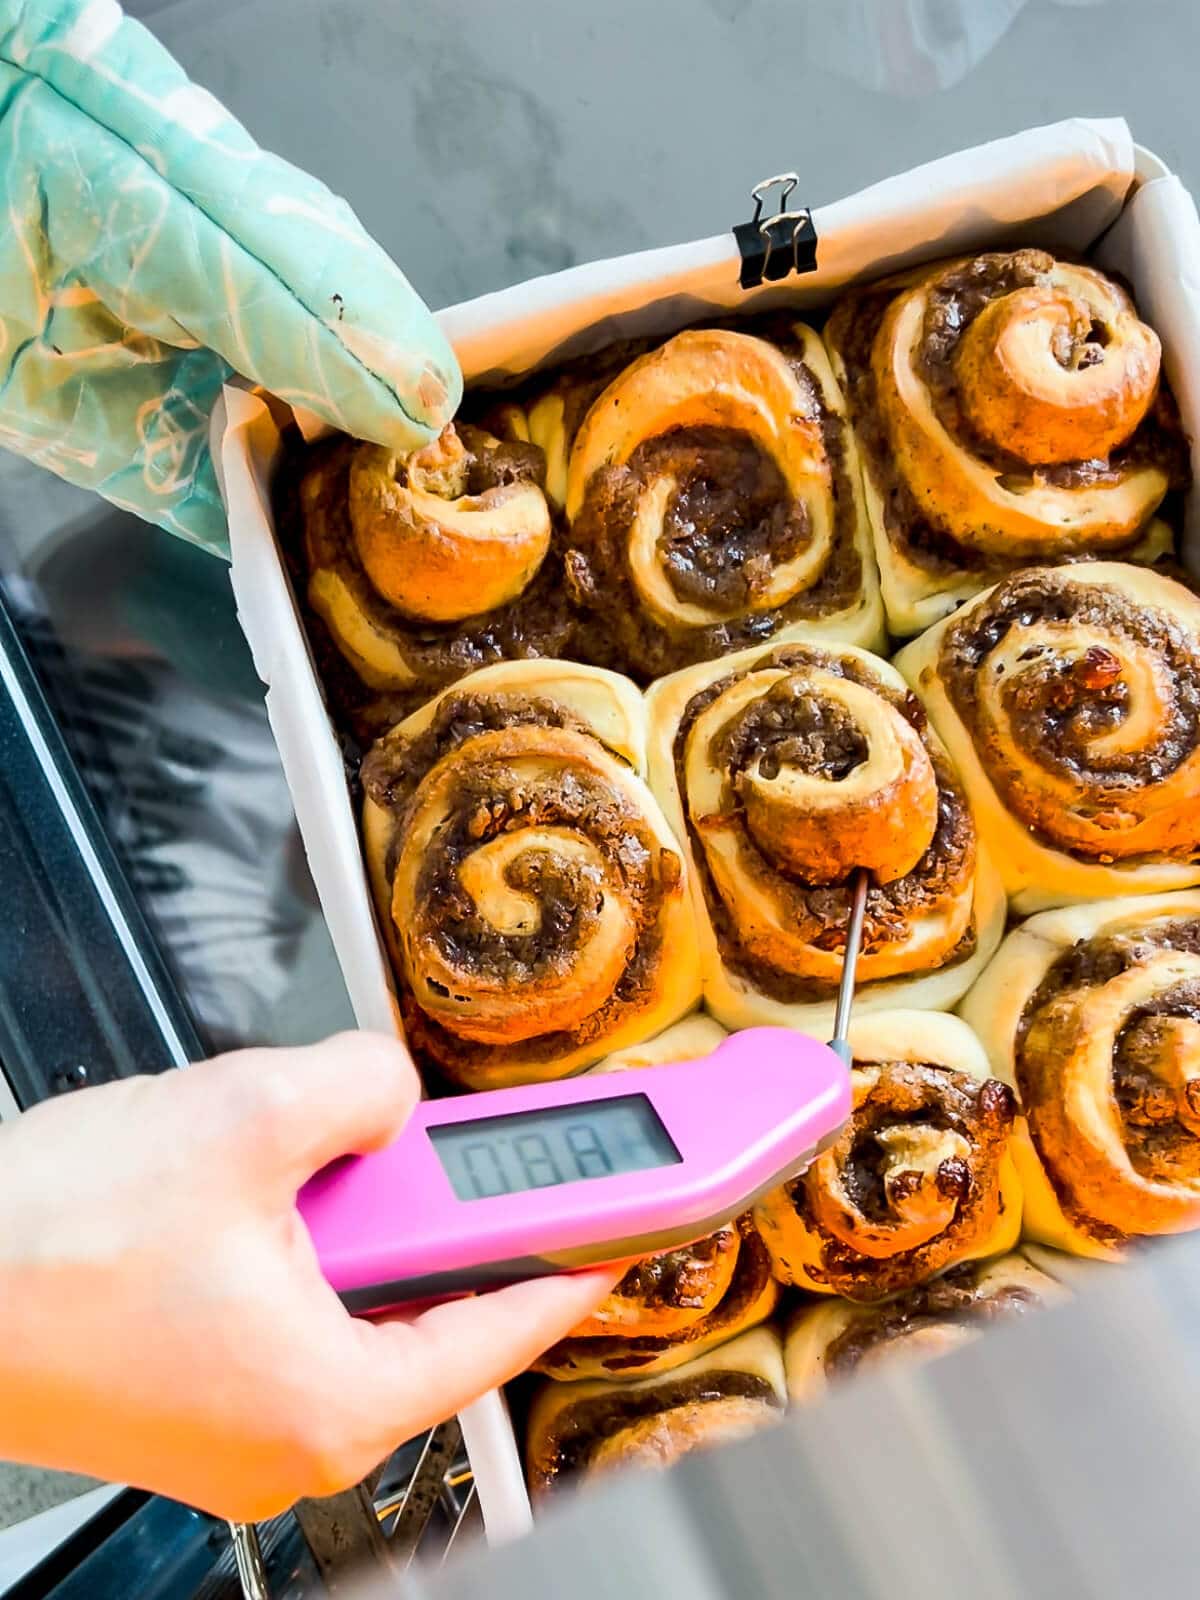 Checking the internal temperature of cinnamon rolls with an instant-read digital thermometer to make sure they are baked in the middle.